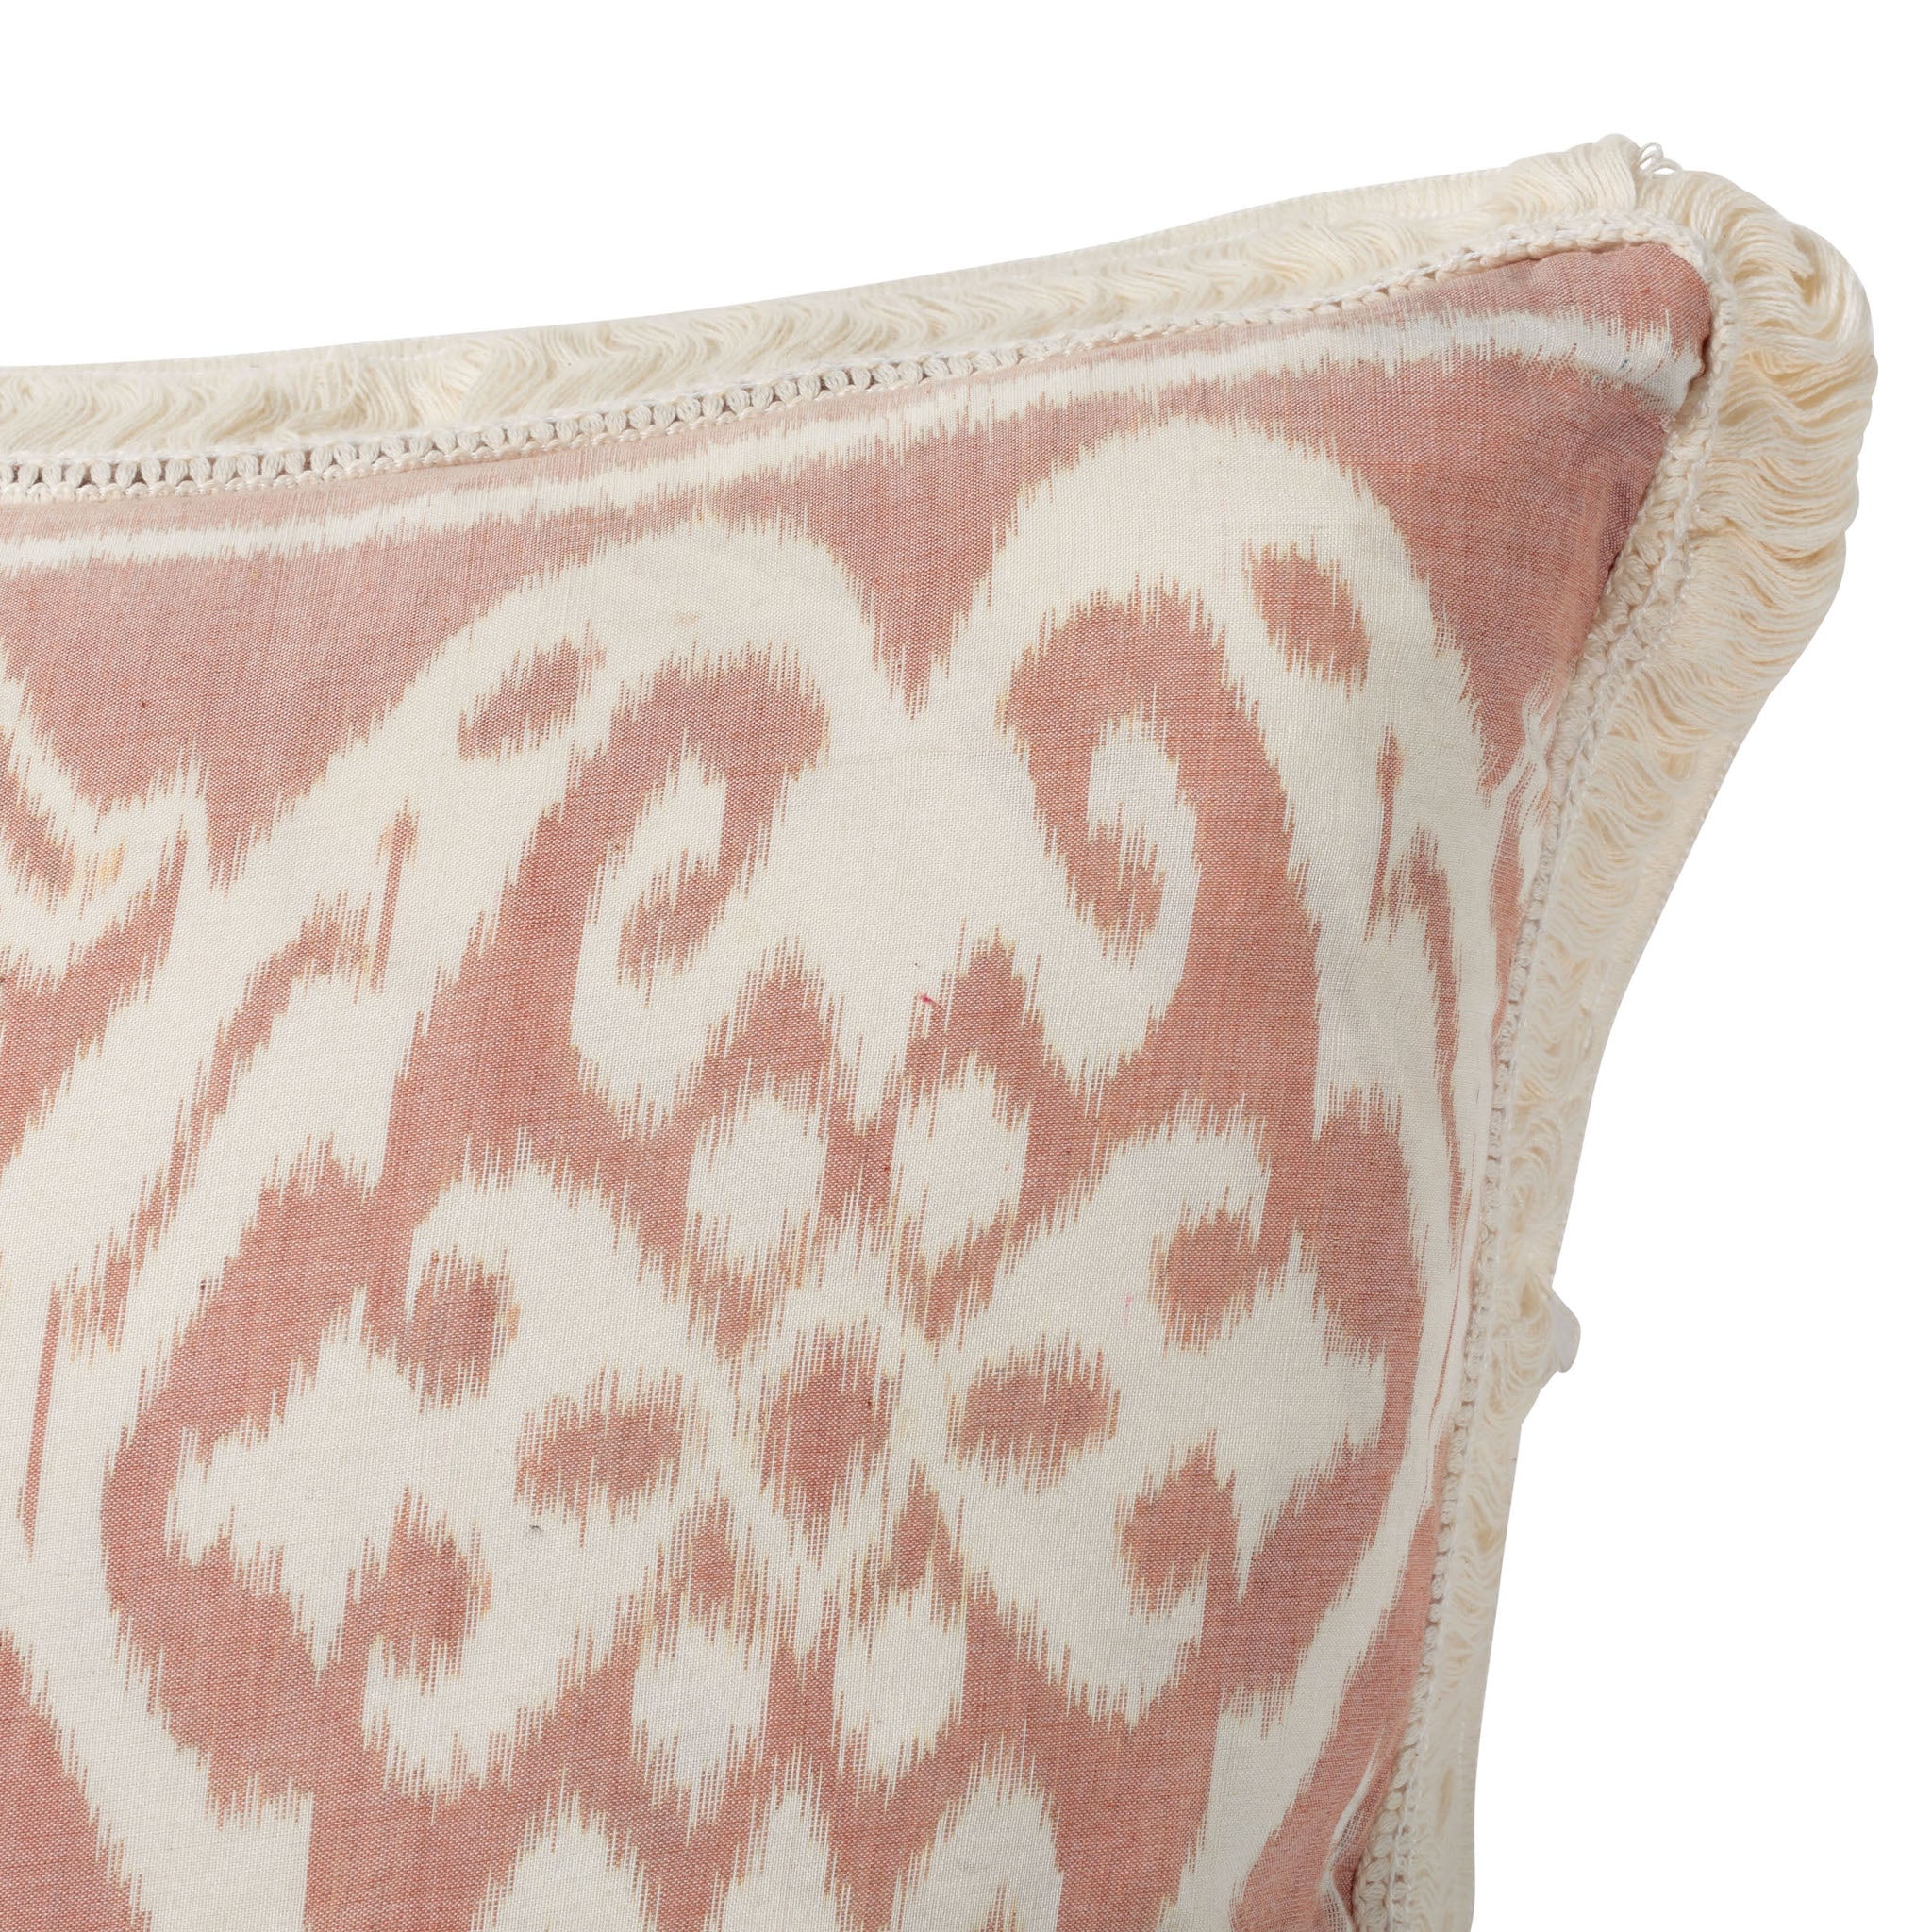 Blush Pink and Cream Square / Scatter Ikat Cushion with Fringe from Bali - DETAIL